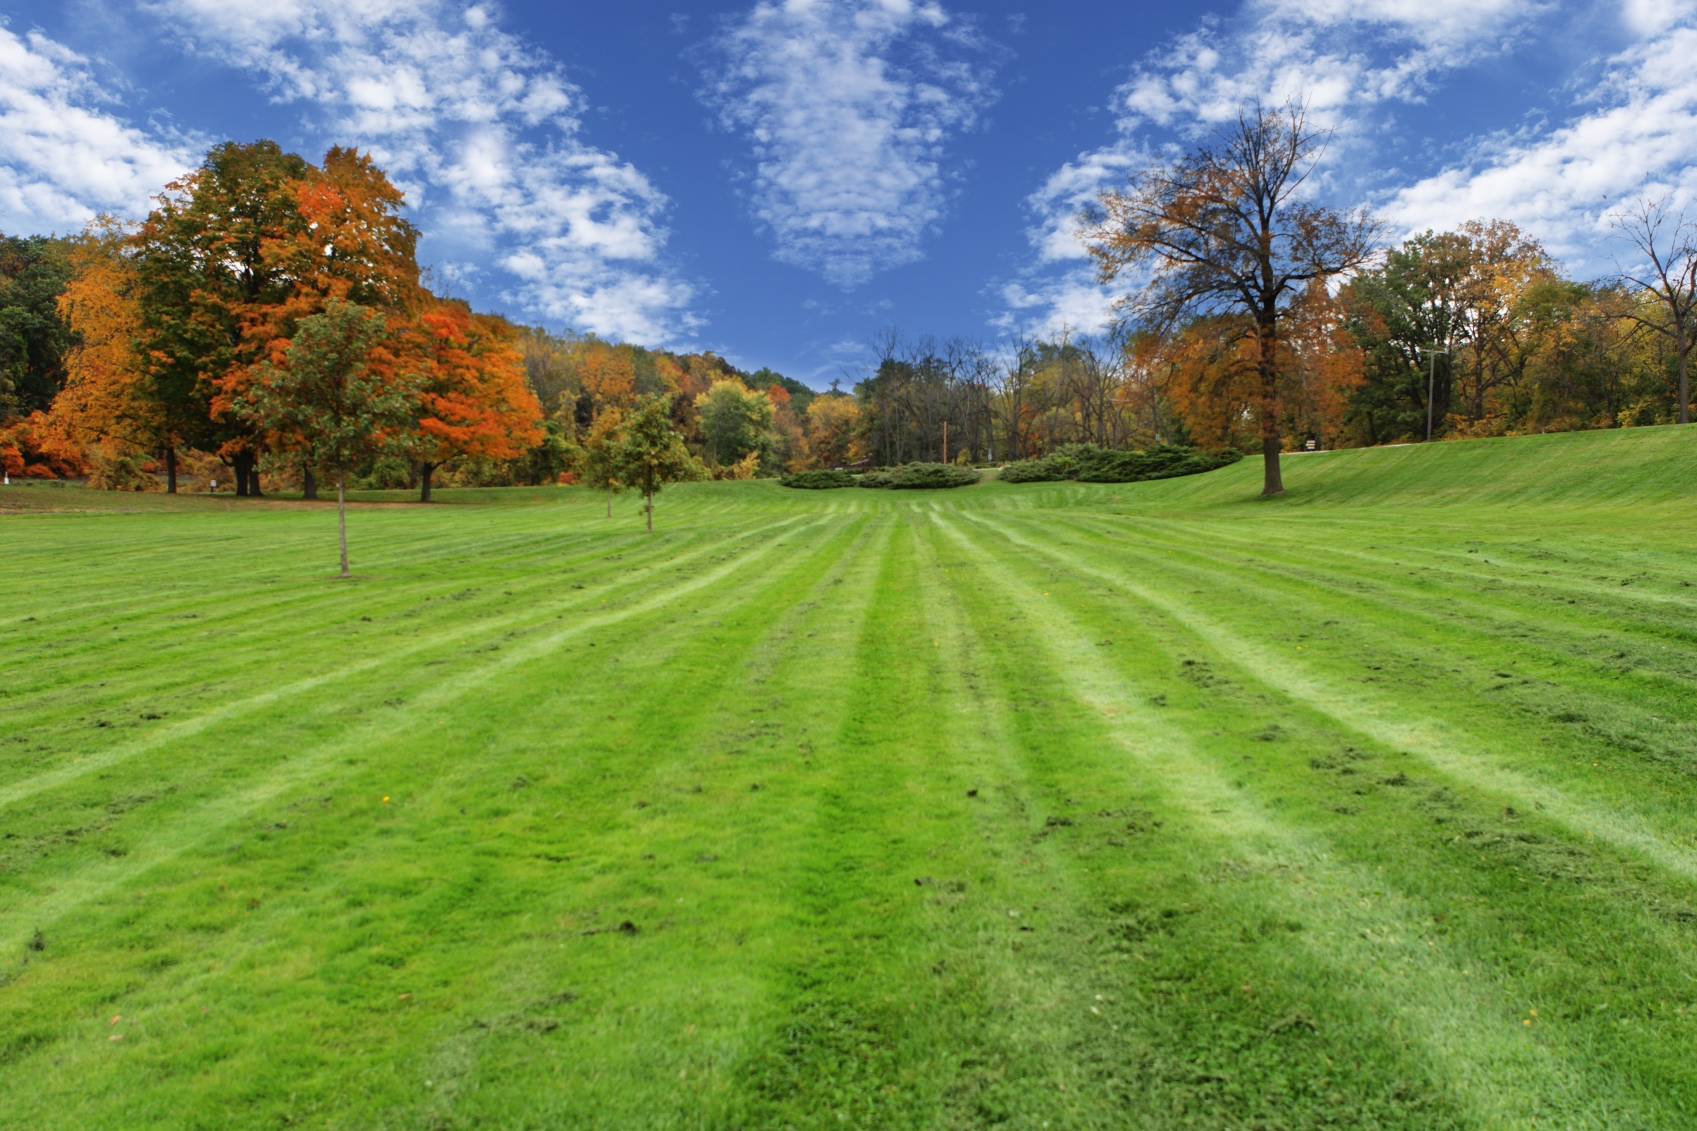 Lawn Mowers » Blog Archive Organic Lawn Care Service - Lawn Mowers